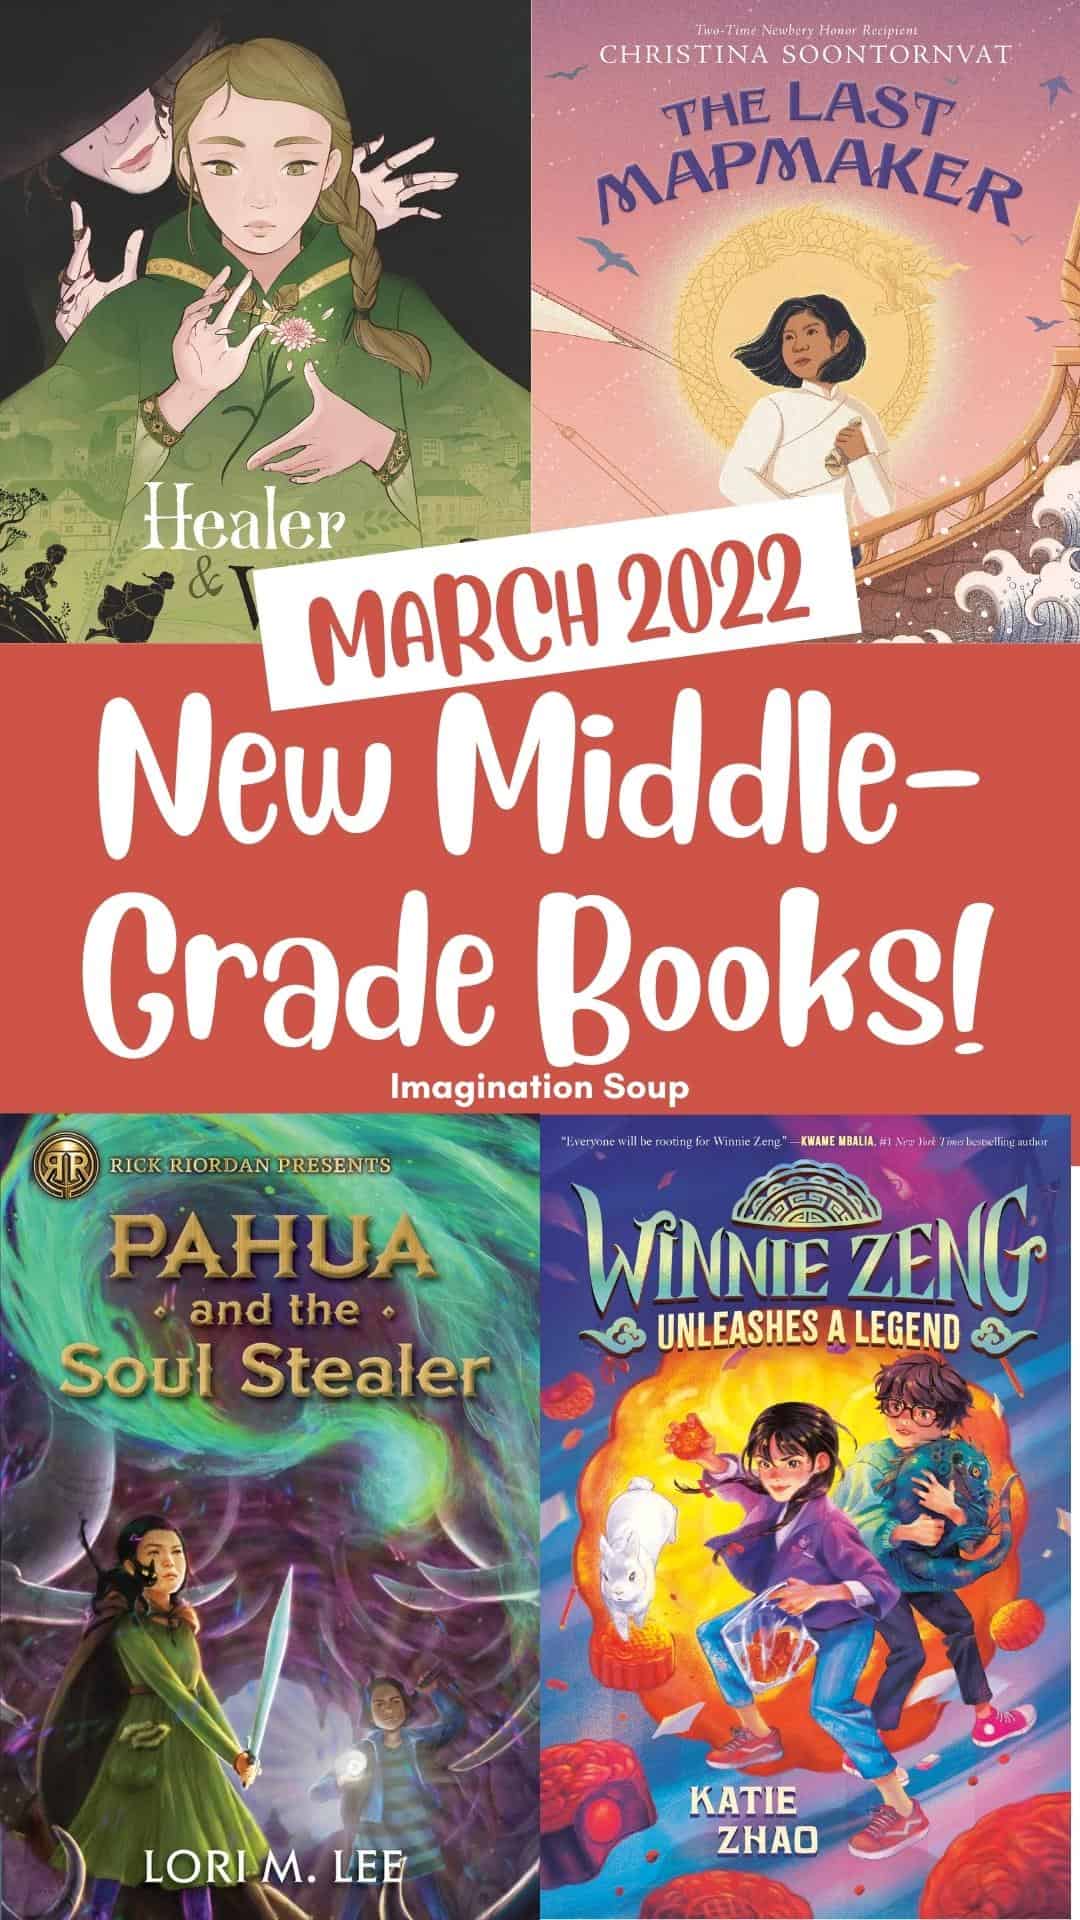 New Middle School Books, March 2022 